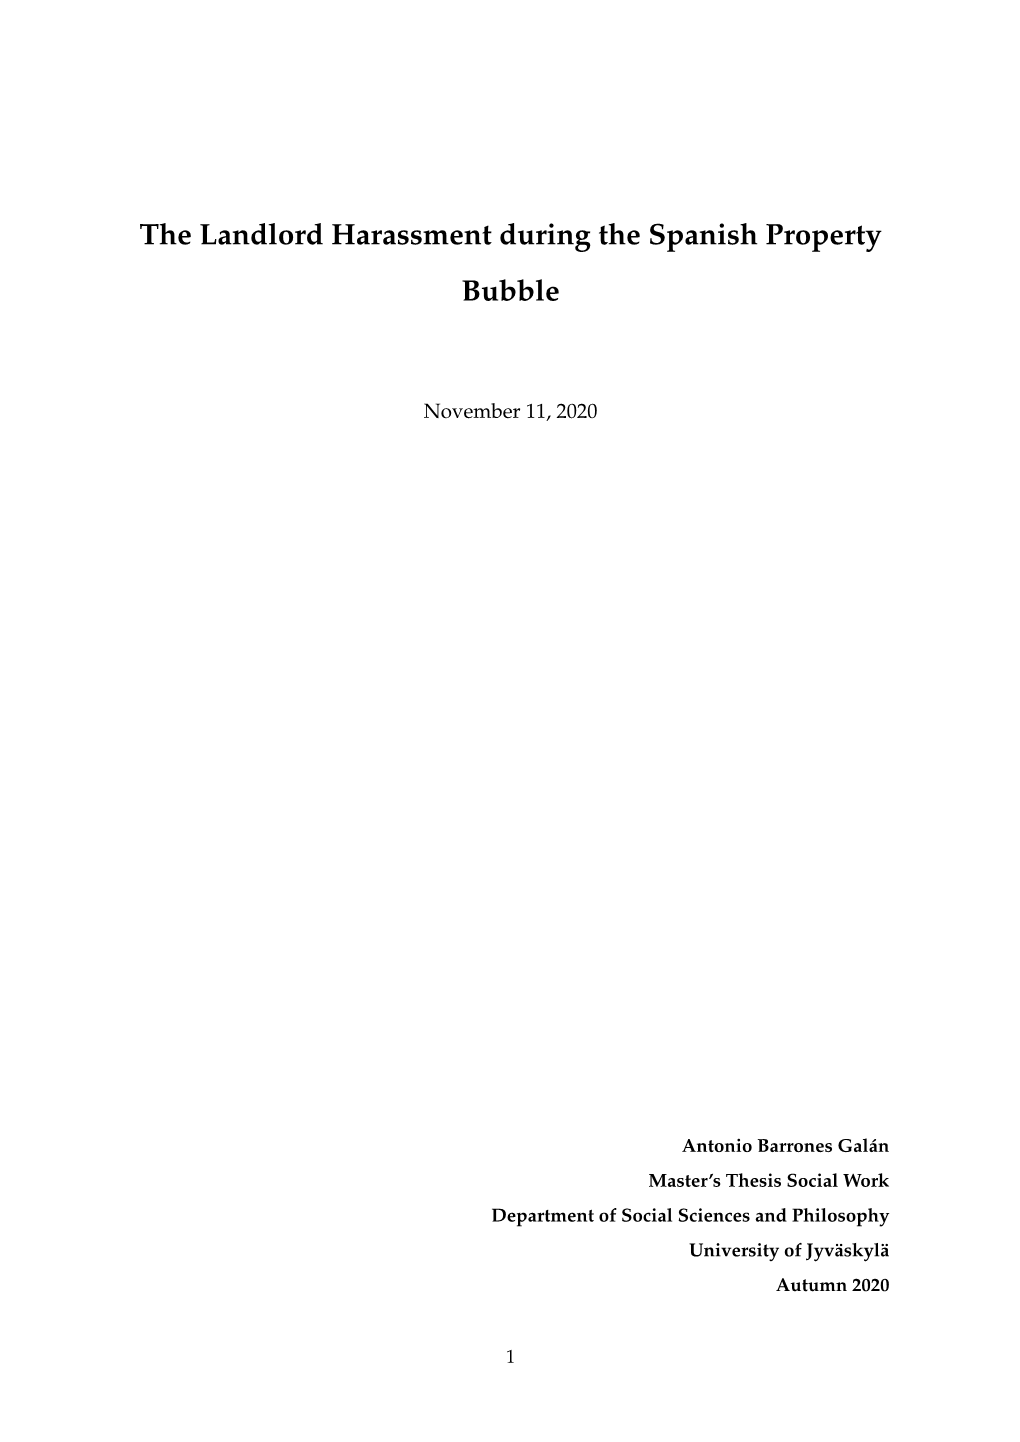 The Landlord Harassment During the Spanish Property Bubble